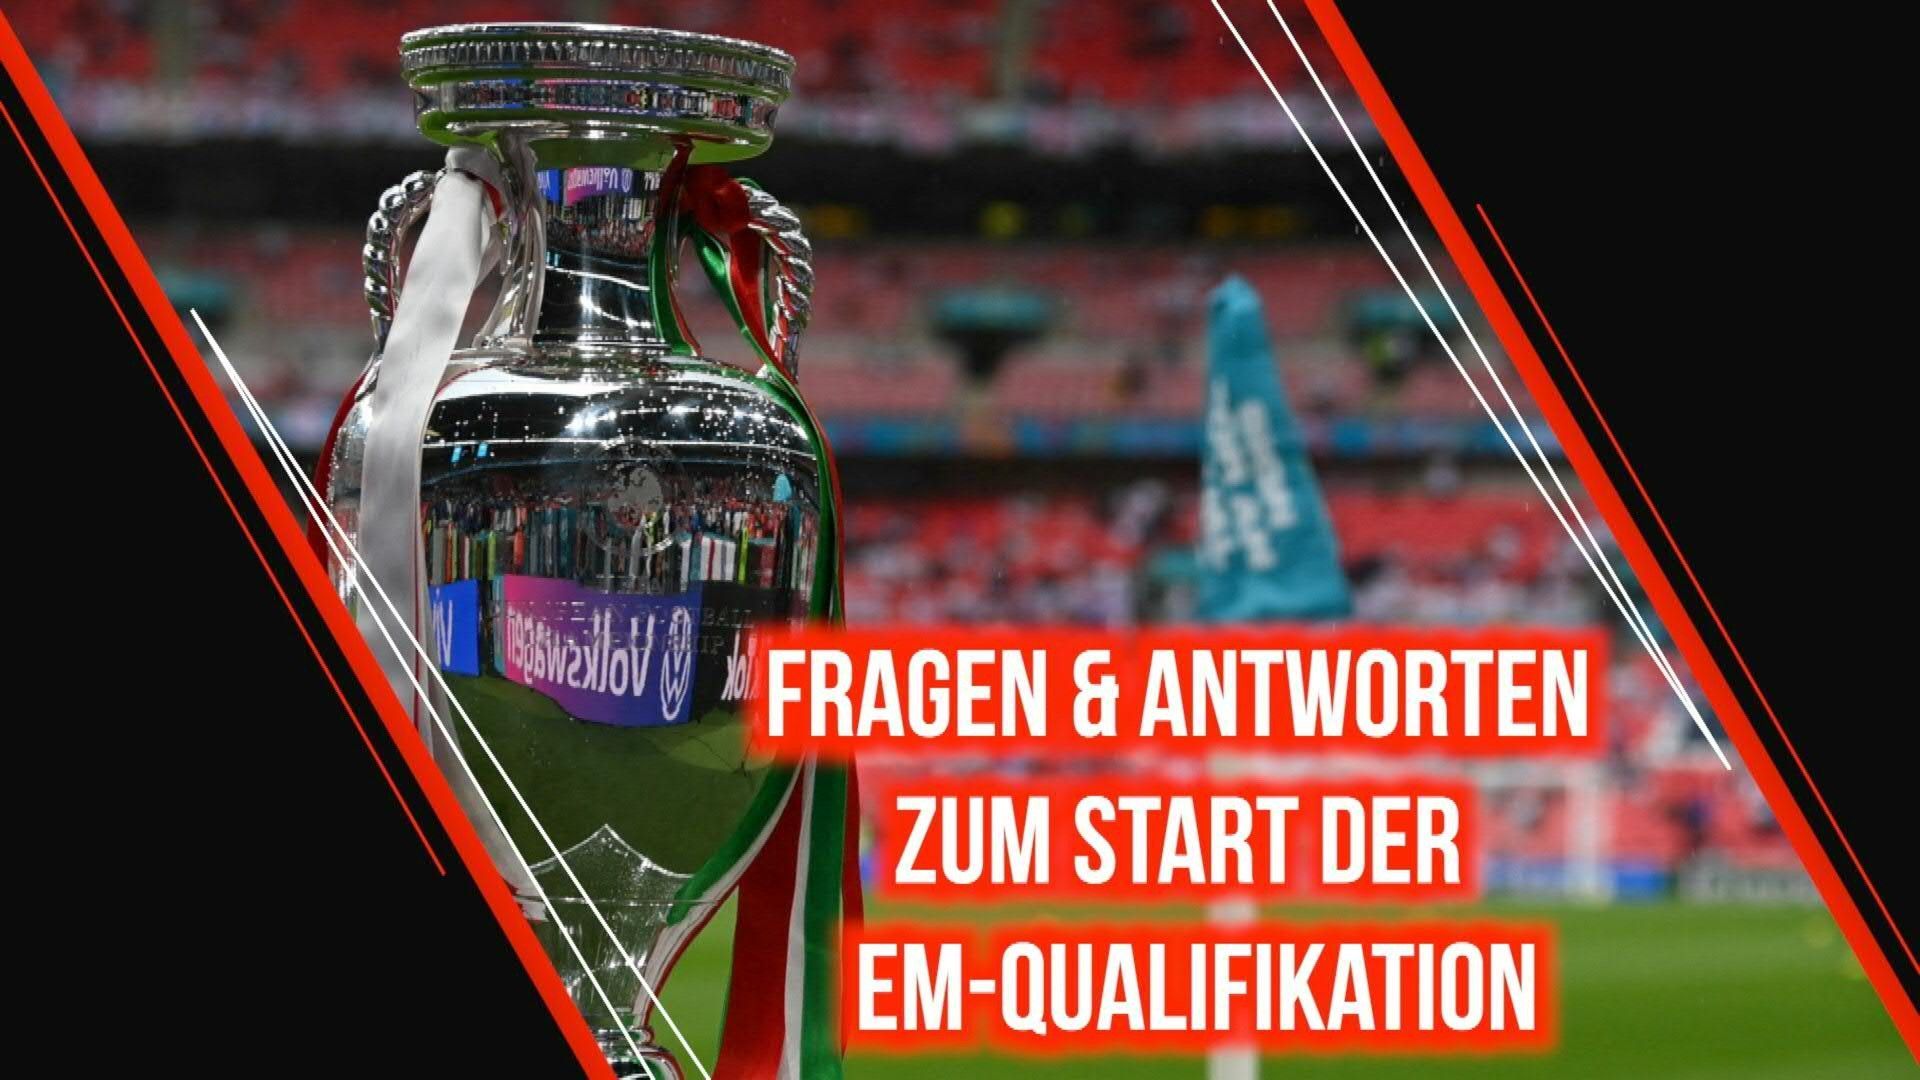 Questions and answers about the European Championship qualification